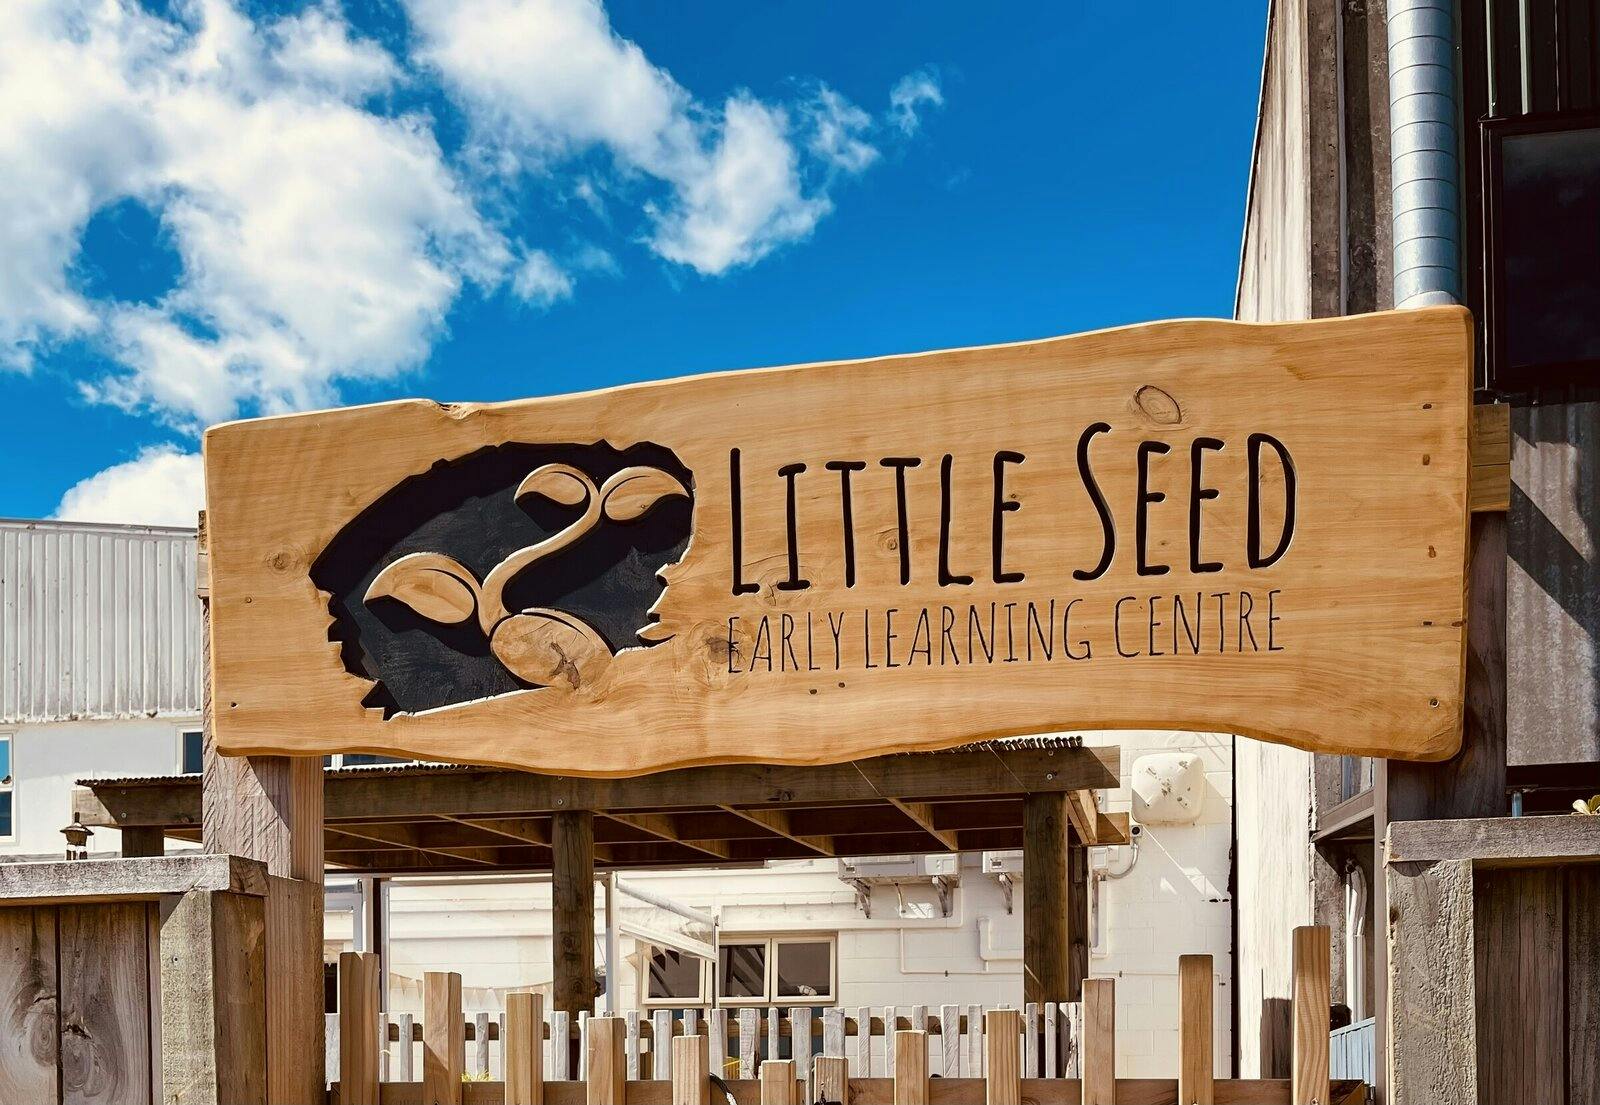 A picture of Little Seed Early Learning Centre